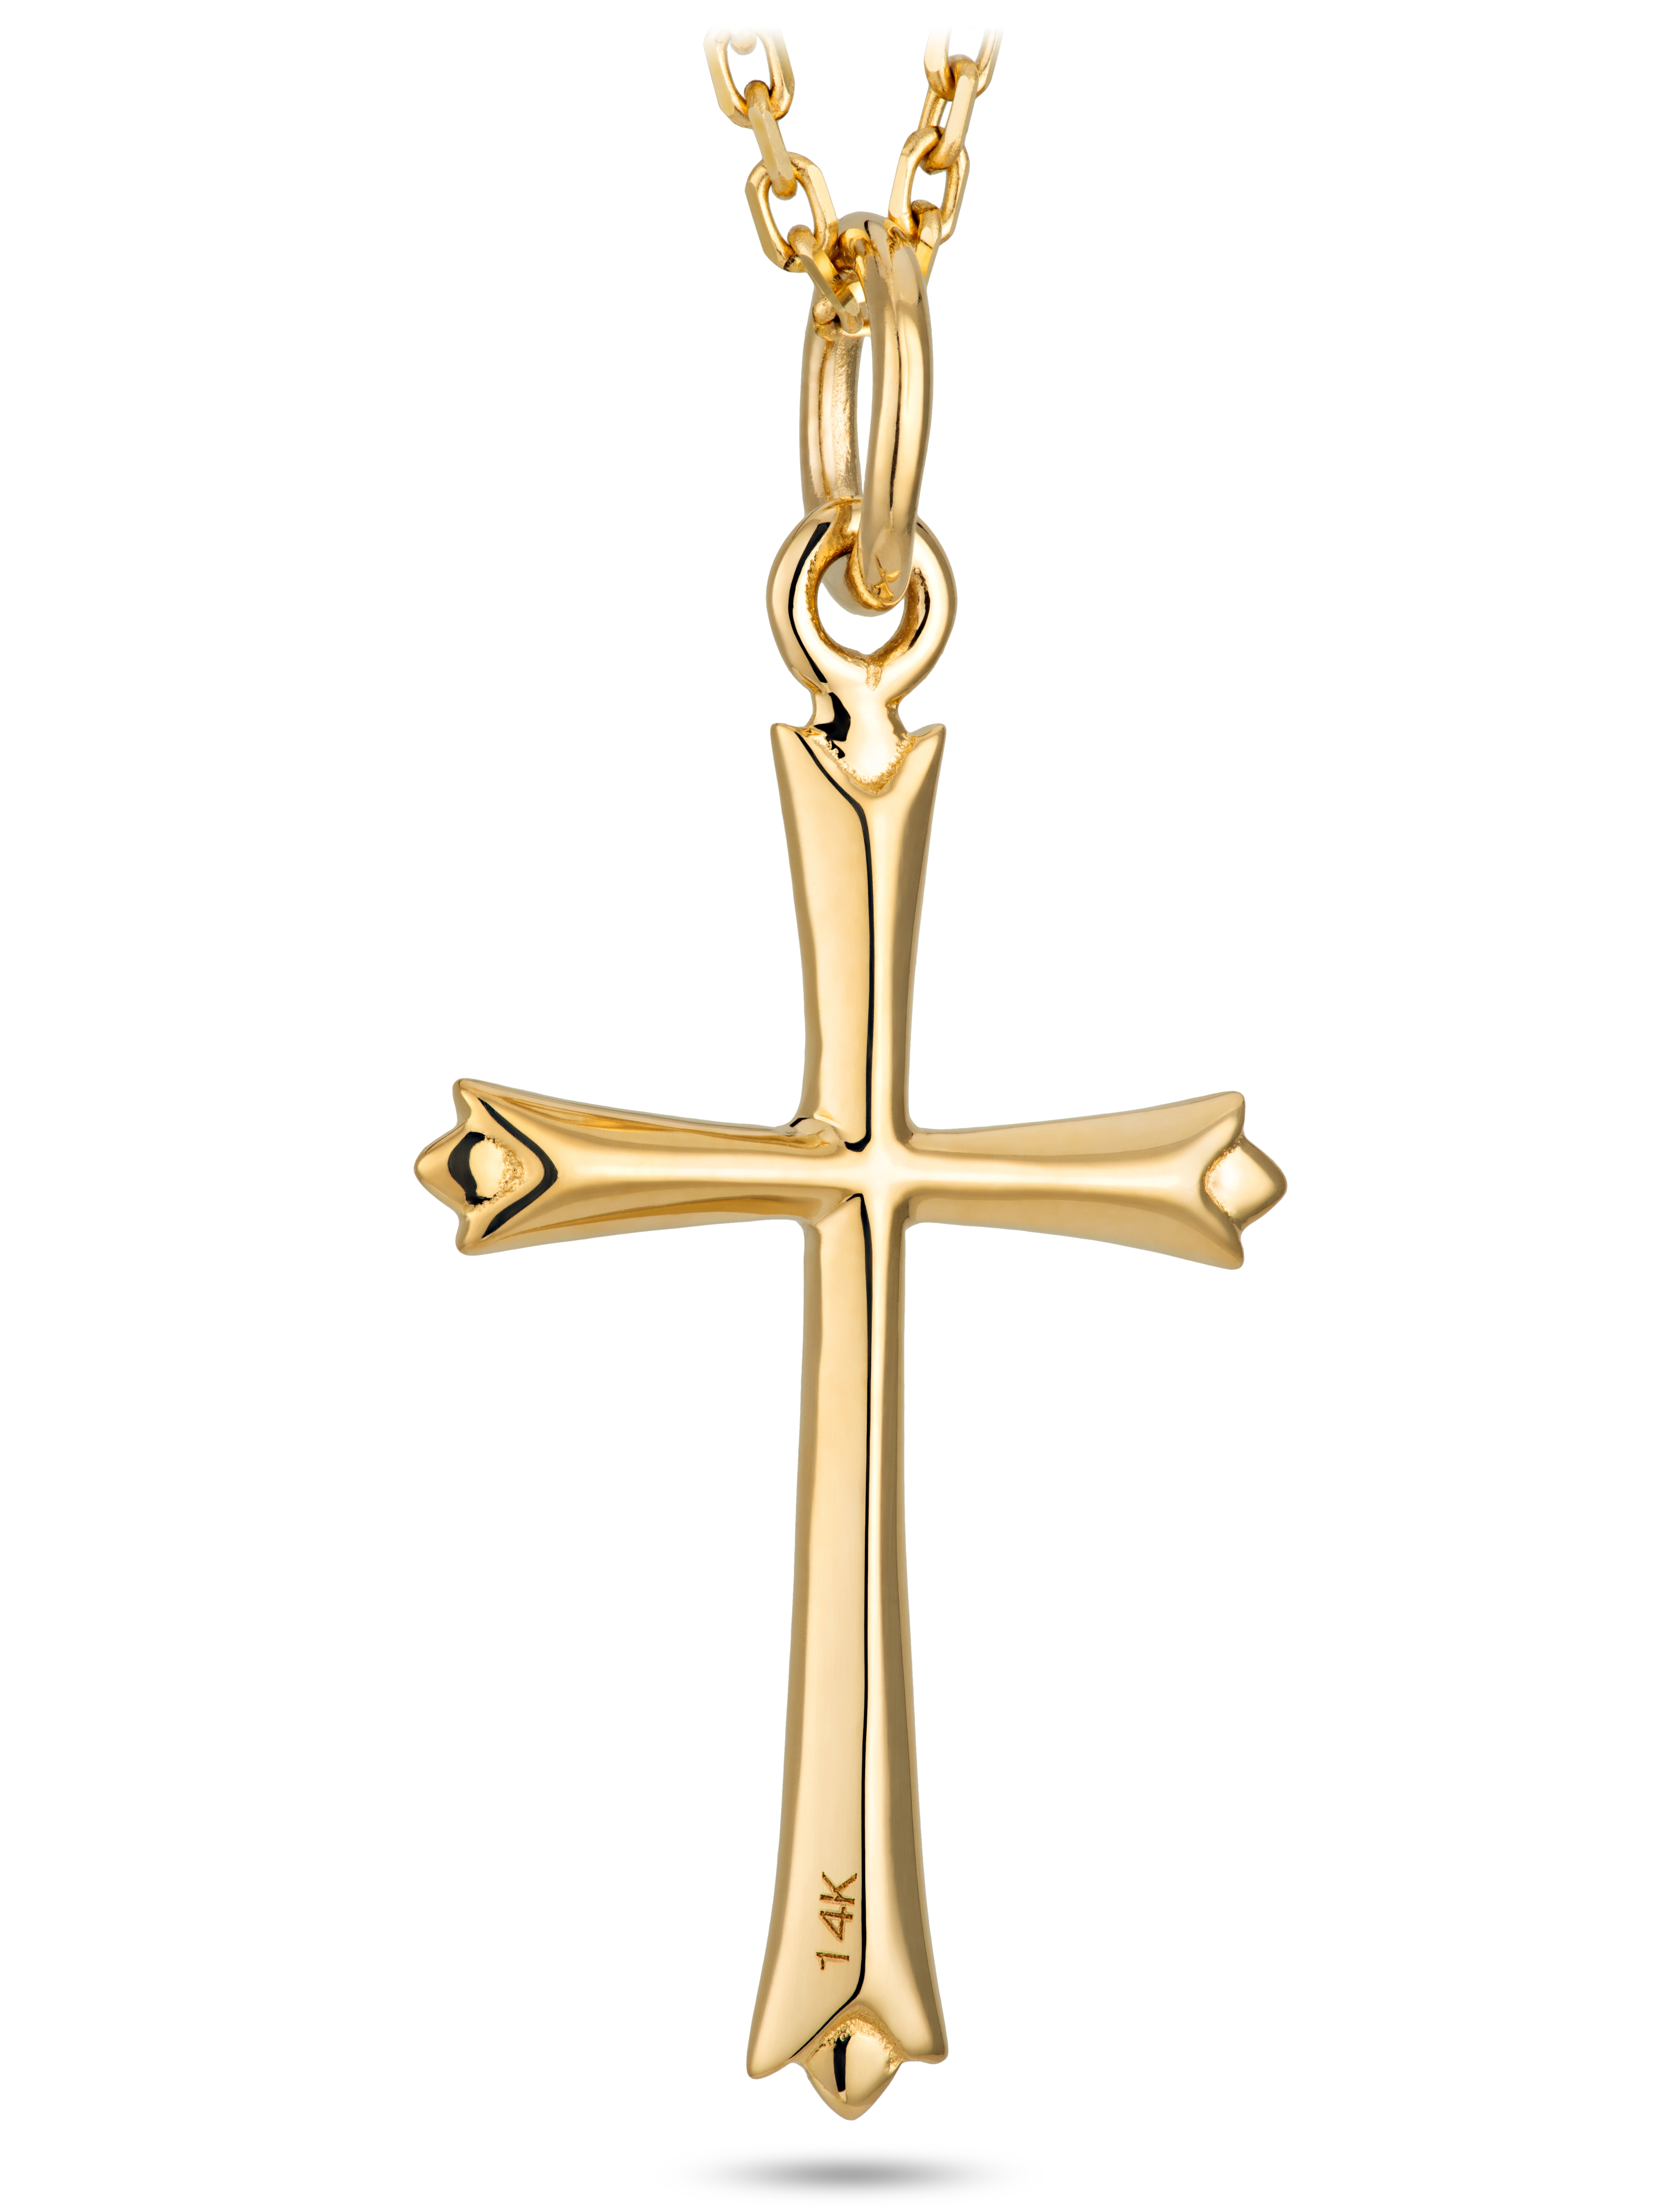 Buy Sale Gold Cross Necklace Women Two Tone Cross Pendant Gold Filled  Christian Catholic Jewelry Gift for Mom, Rope Chain Online in India - Etsy